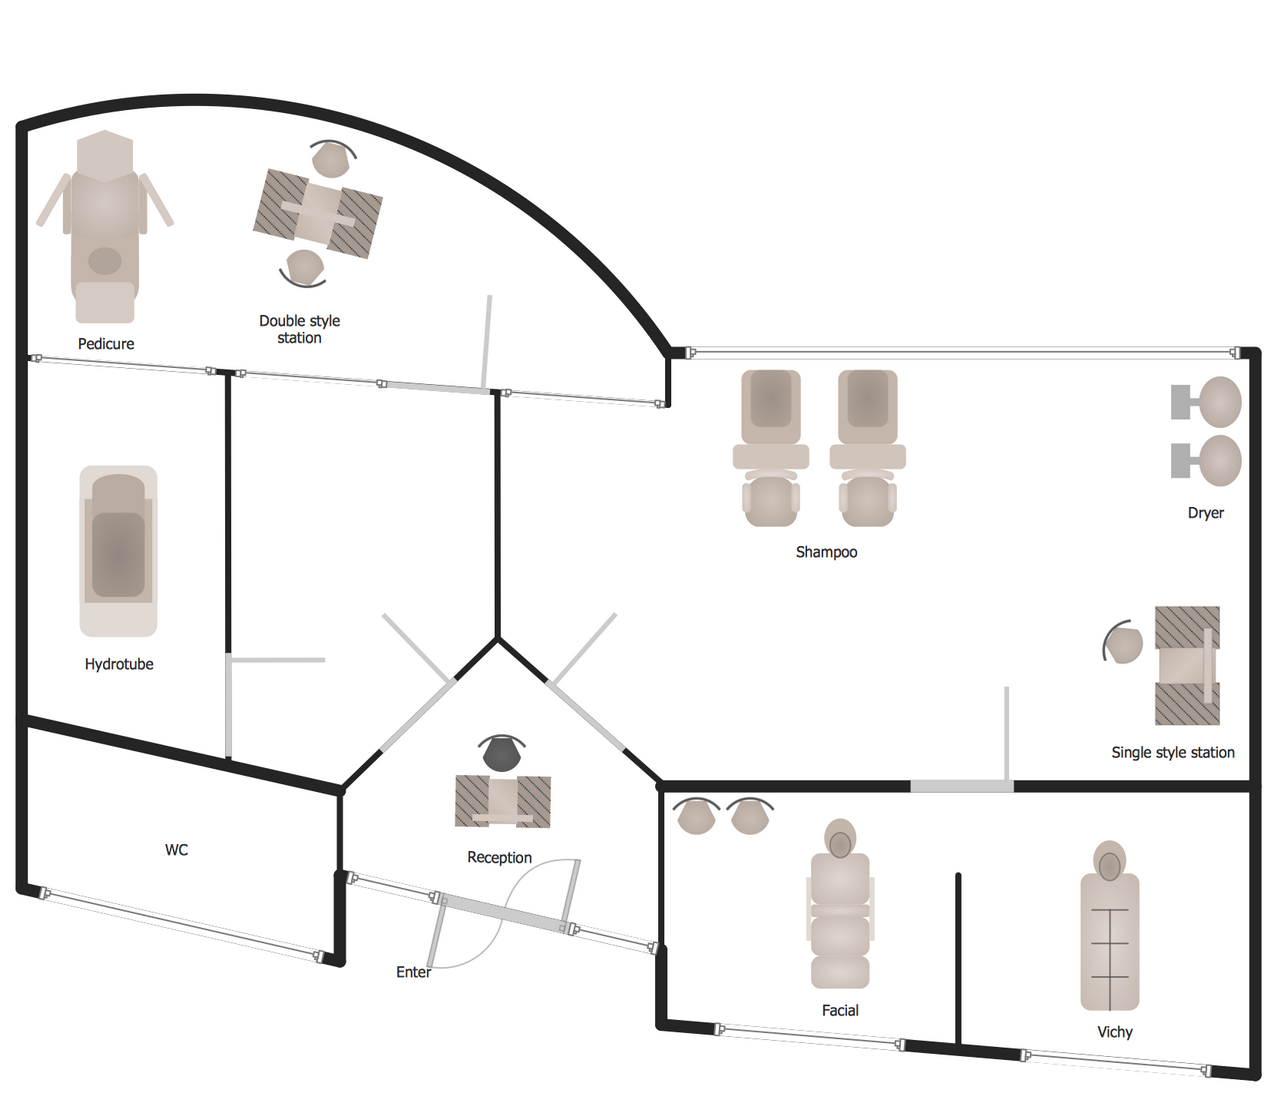 Day Care Floor Plan Creator Gym and Spa Area Plans  Solution ConceptDraw com